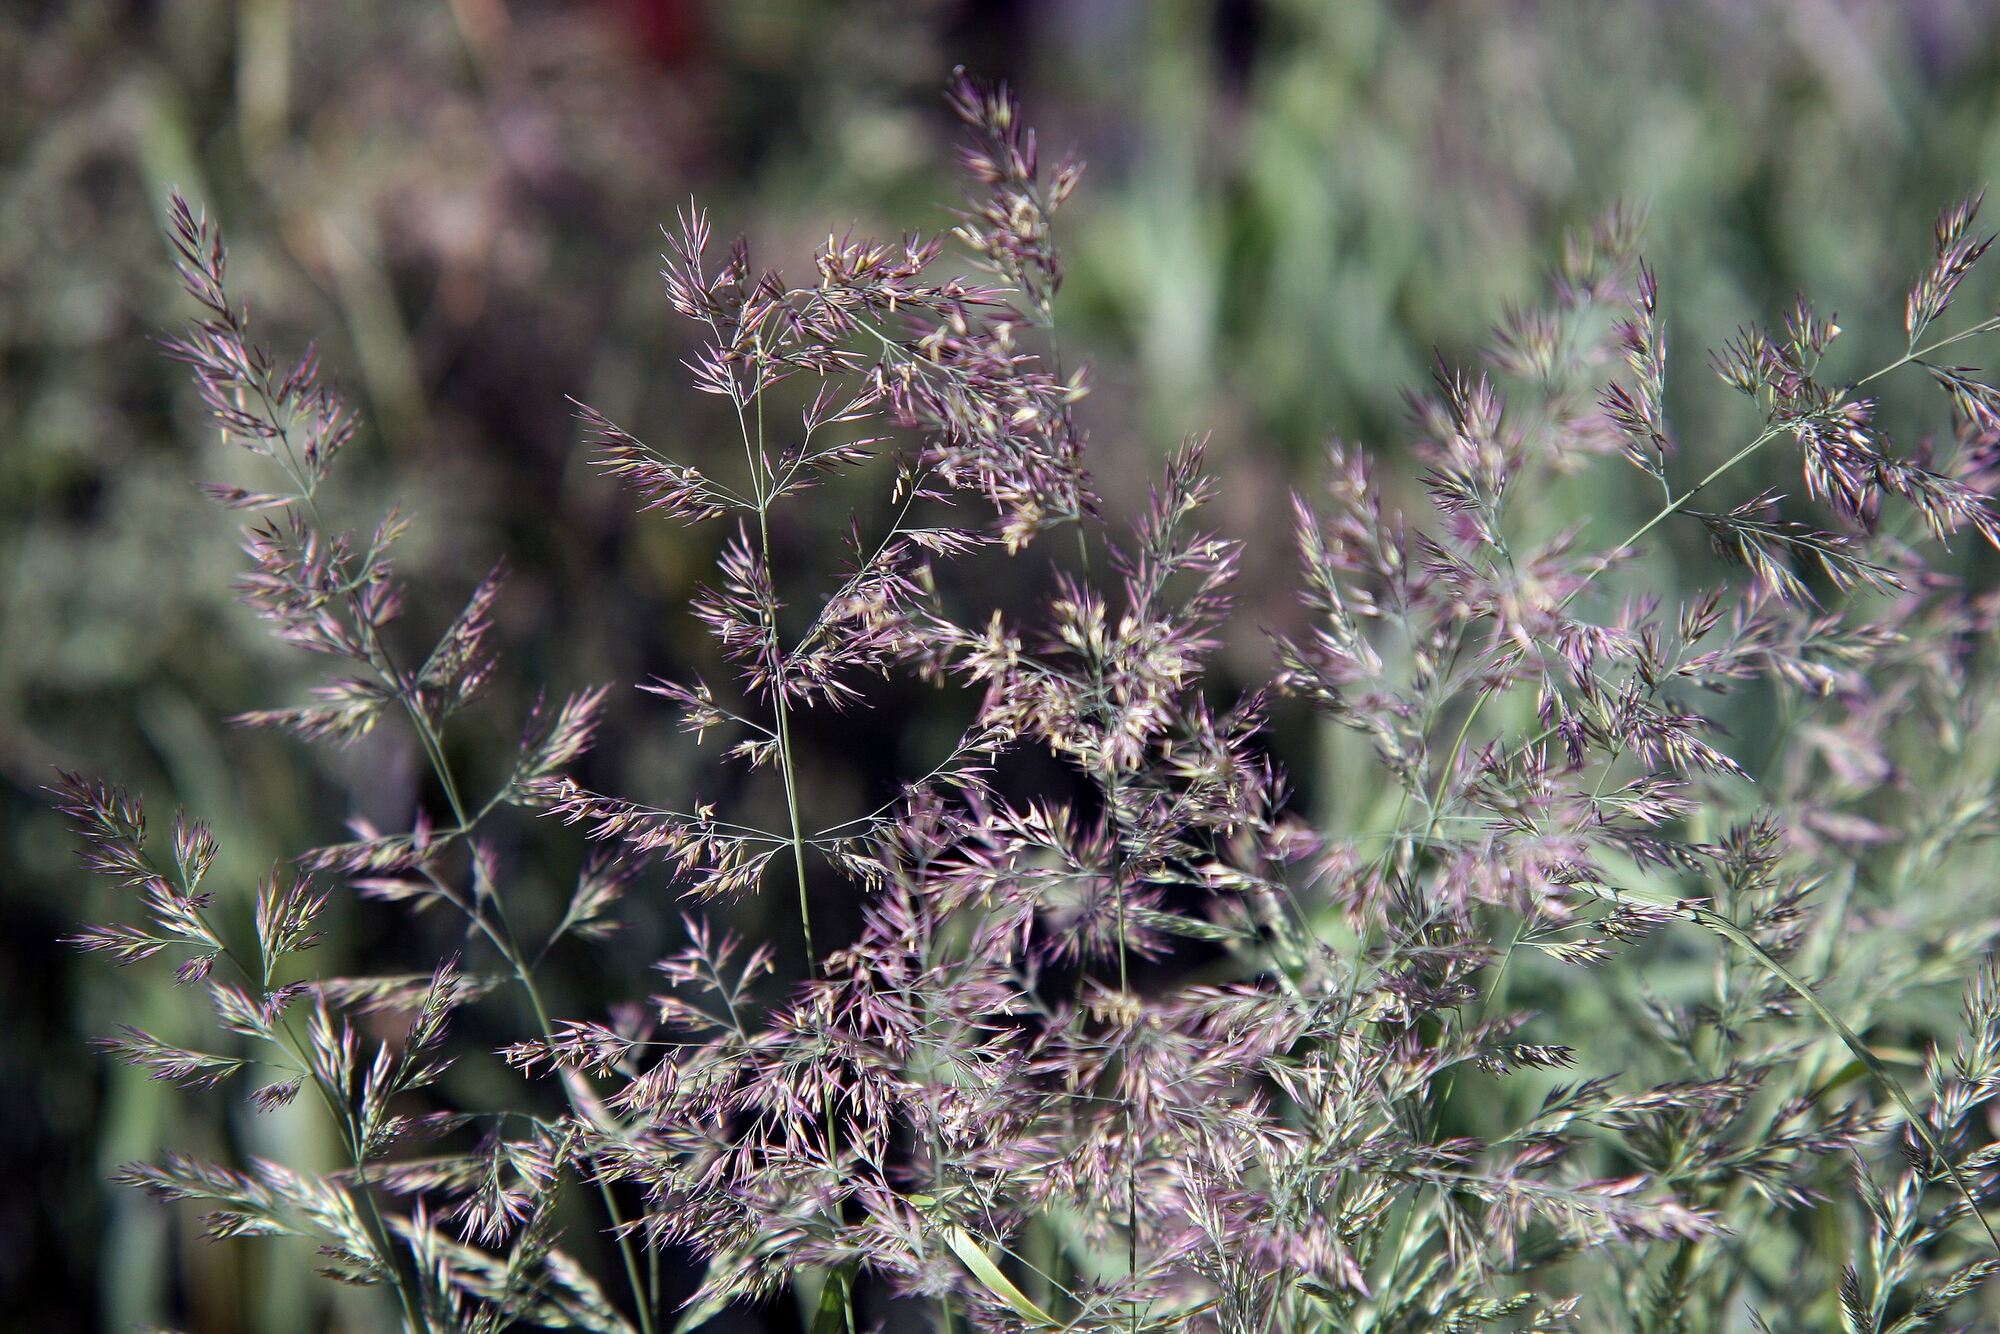 Photograph showing a detail of inflorescences of muhly grass, which are purplish and loosely organized.